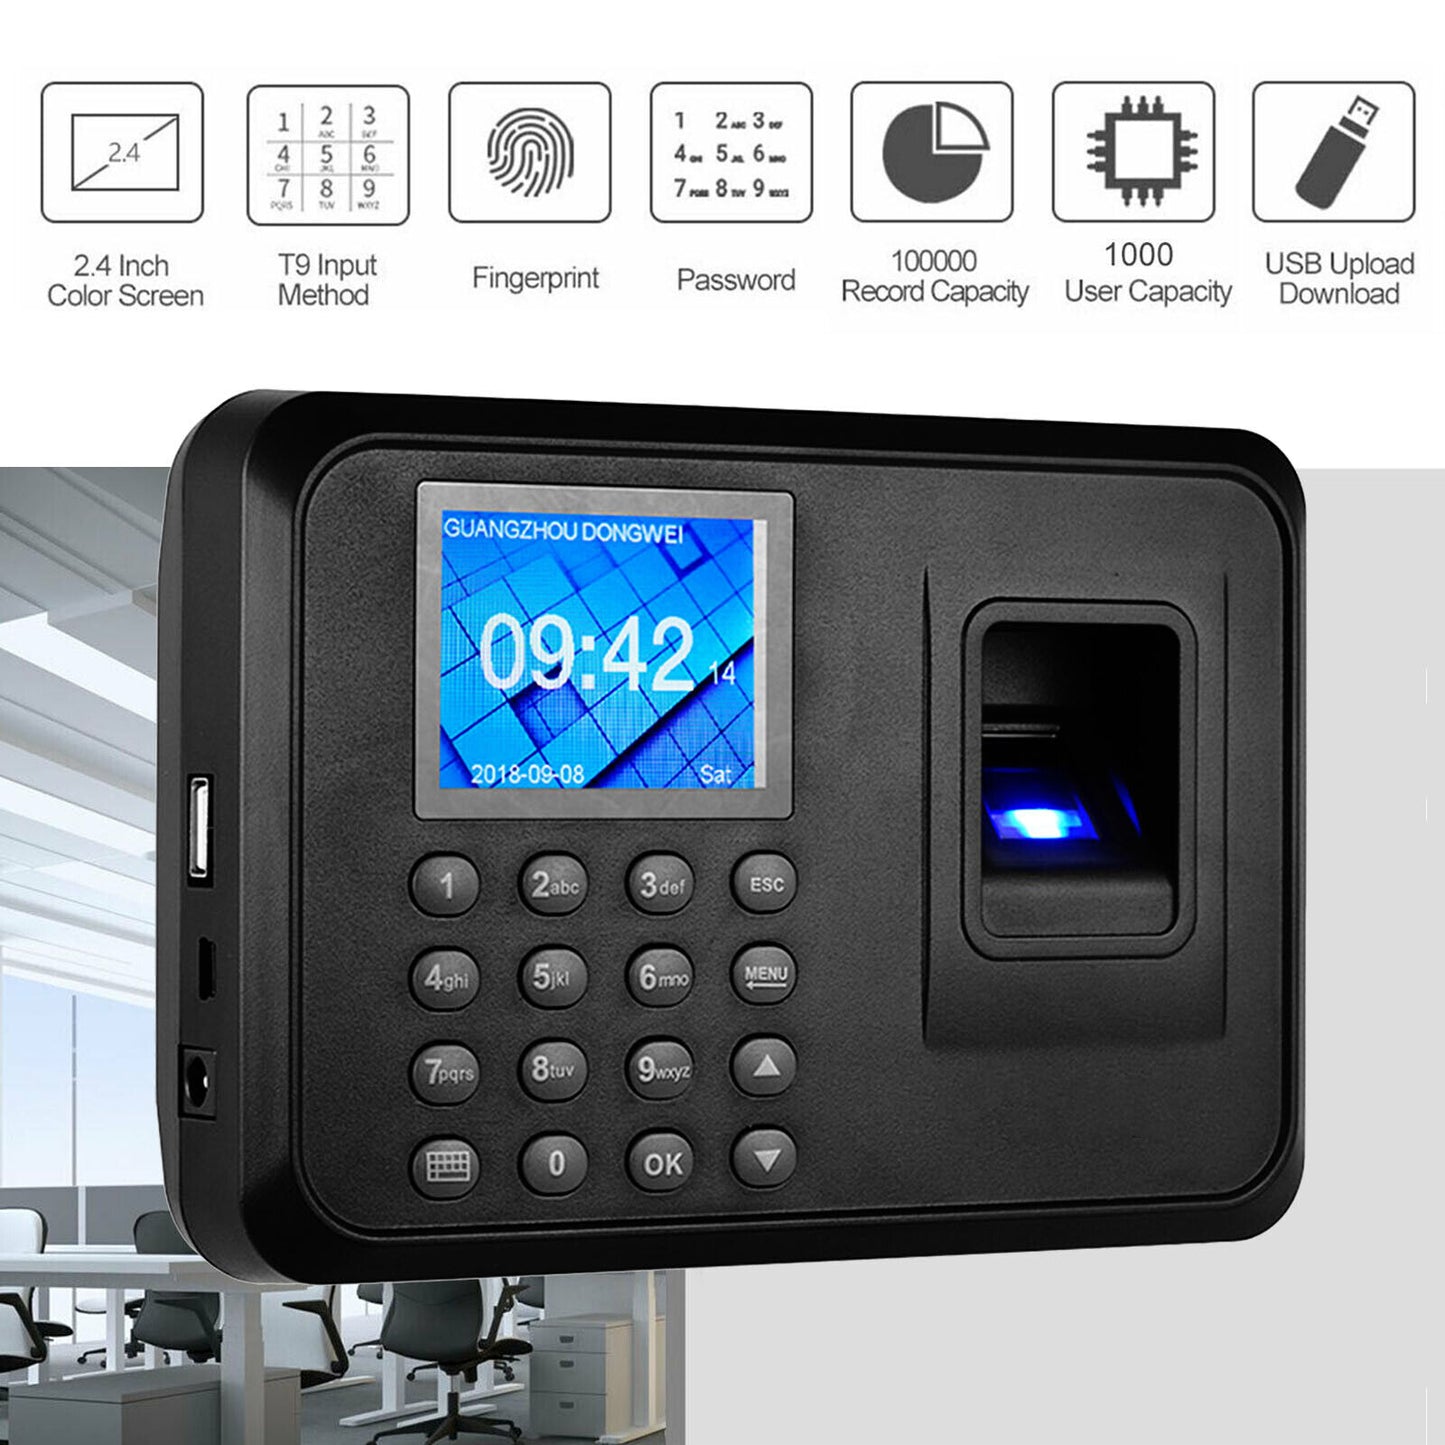 LogicOwl OJ-F01 FP Attendance Biometric Time Logger with Fingerprint and PIN Passcode Entry, Built-In 2.4 Inch TFT LCD Display and Direct Reports Export via USB 2.0 for Office Schedule Timekeeping